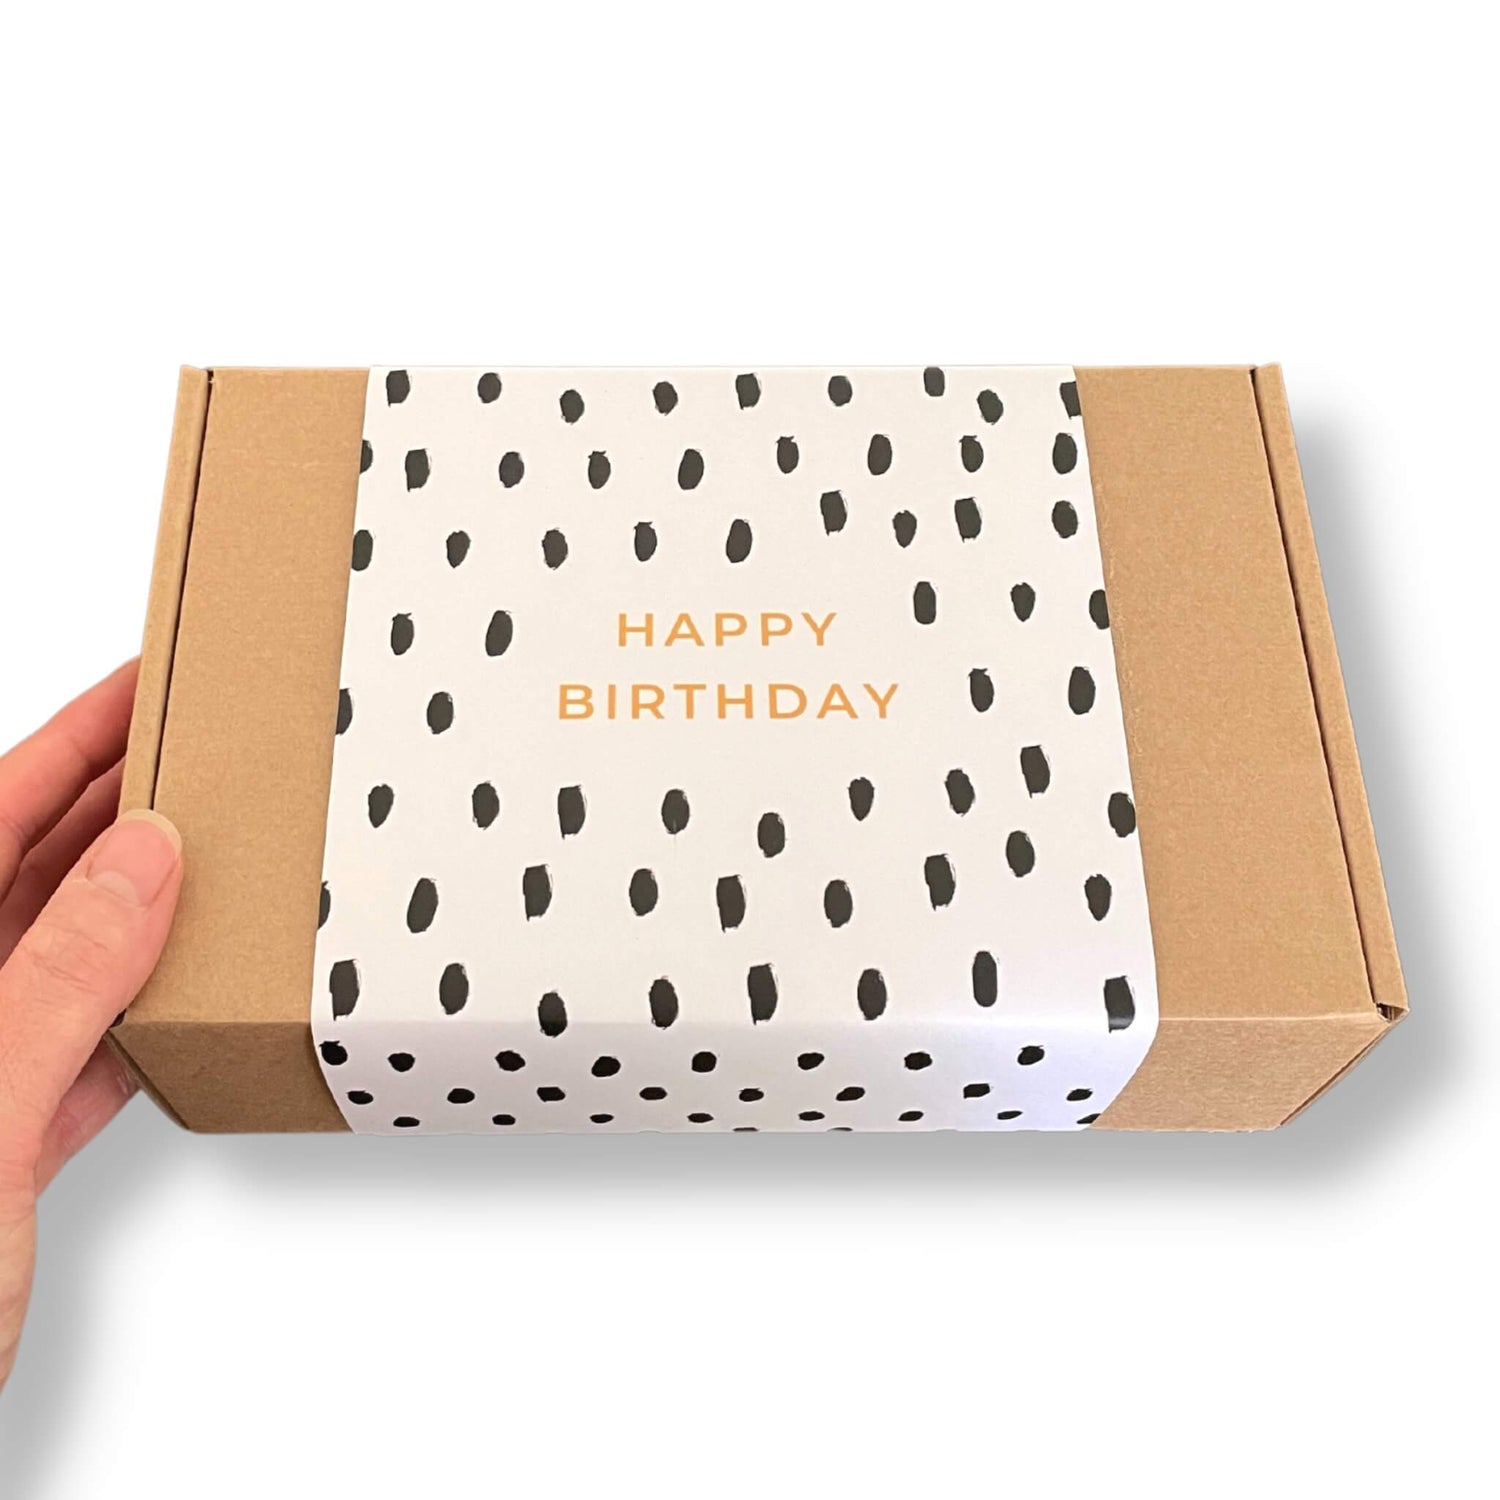 Create your own happy birthday gift box